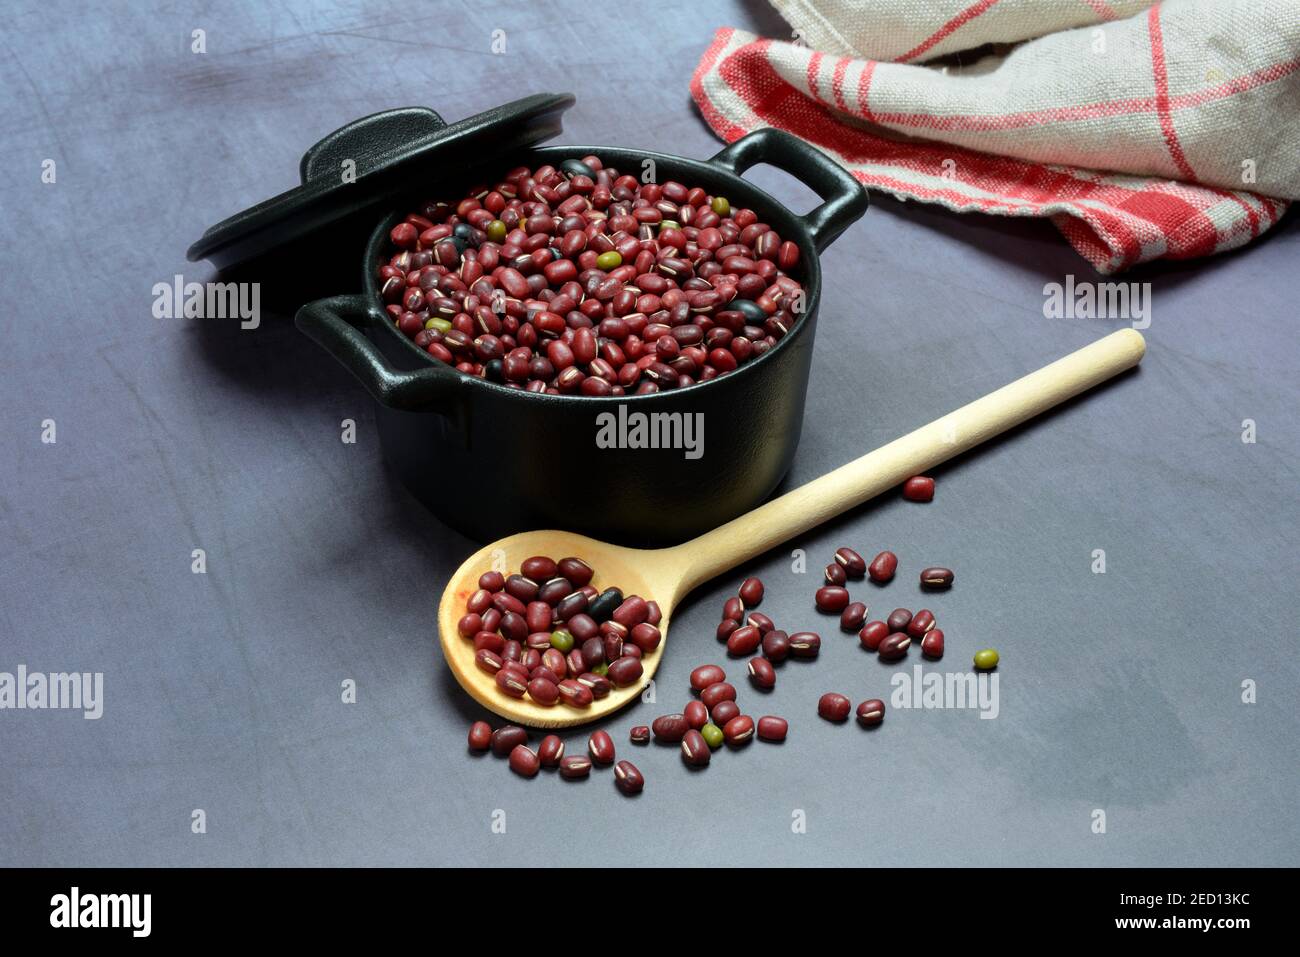 Dried beans in cast iron pot, cooking spoon, Germany Stock Photo